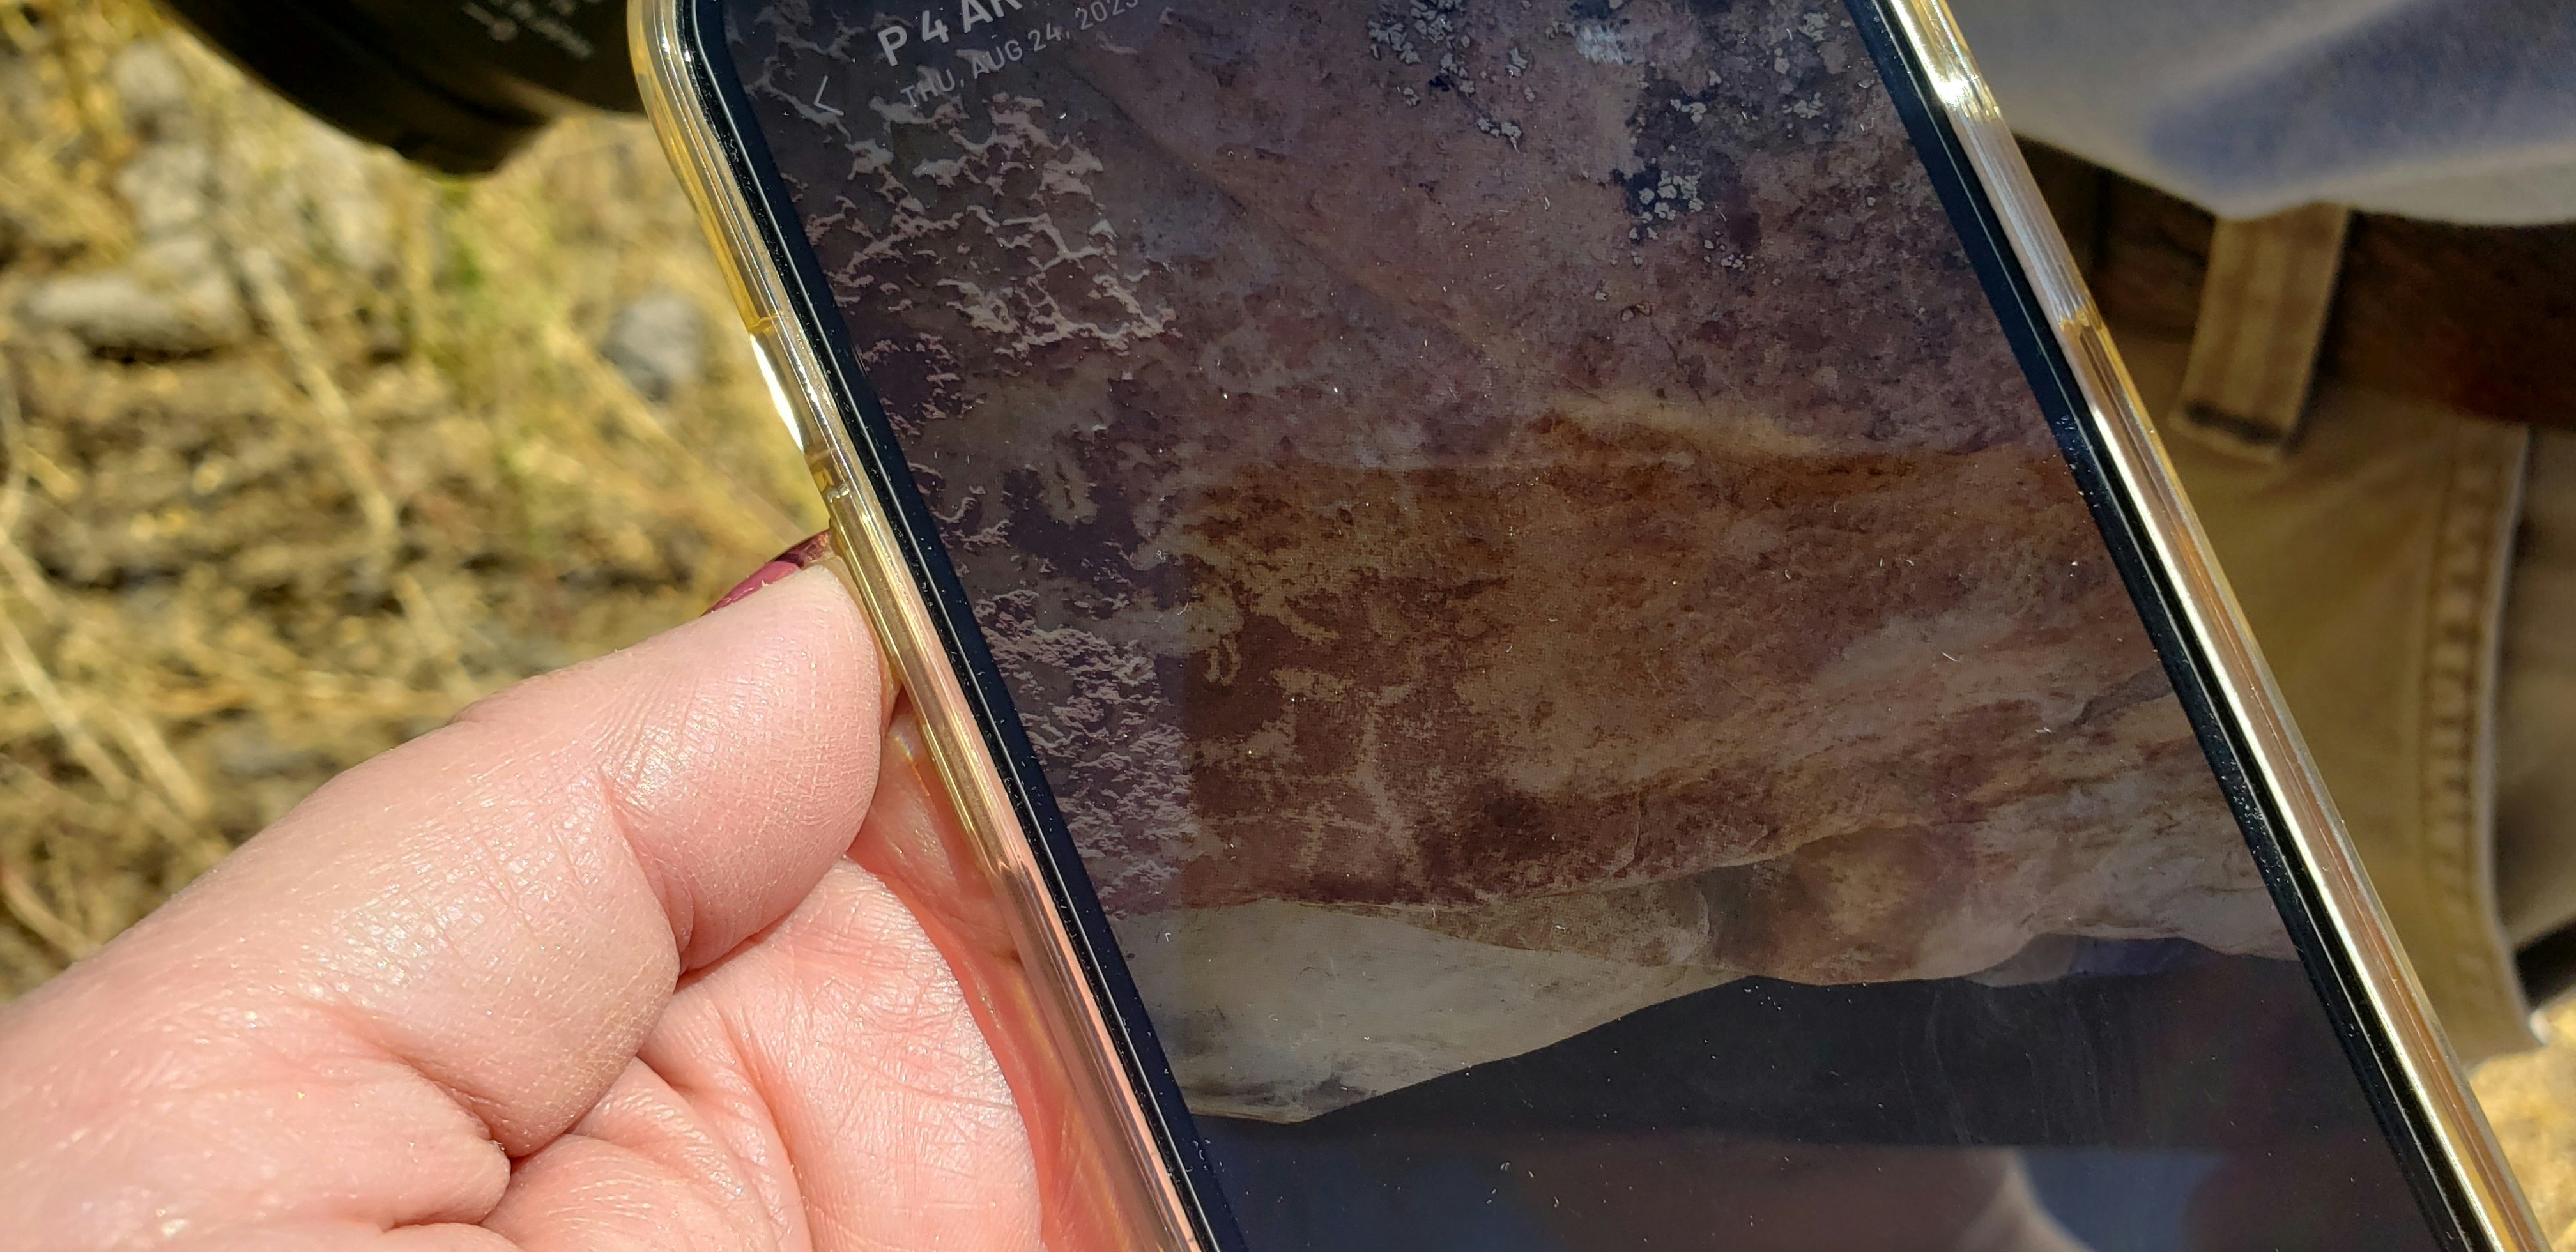 Mike Bies uses a cellphone app to scan petroglyphs. The app can later be used to print 3D models of the petroglyphs.